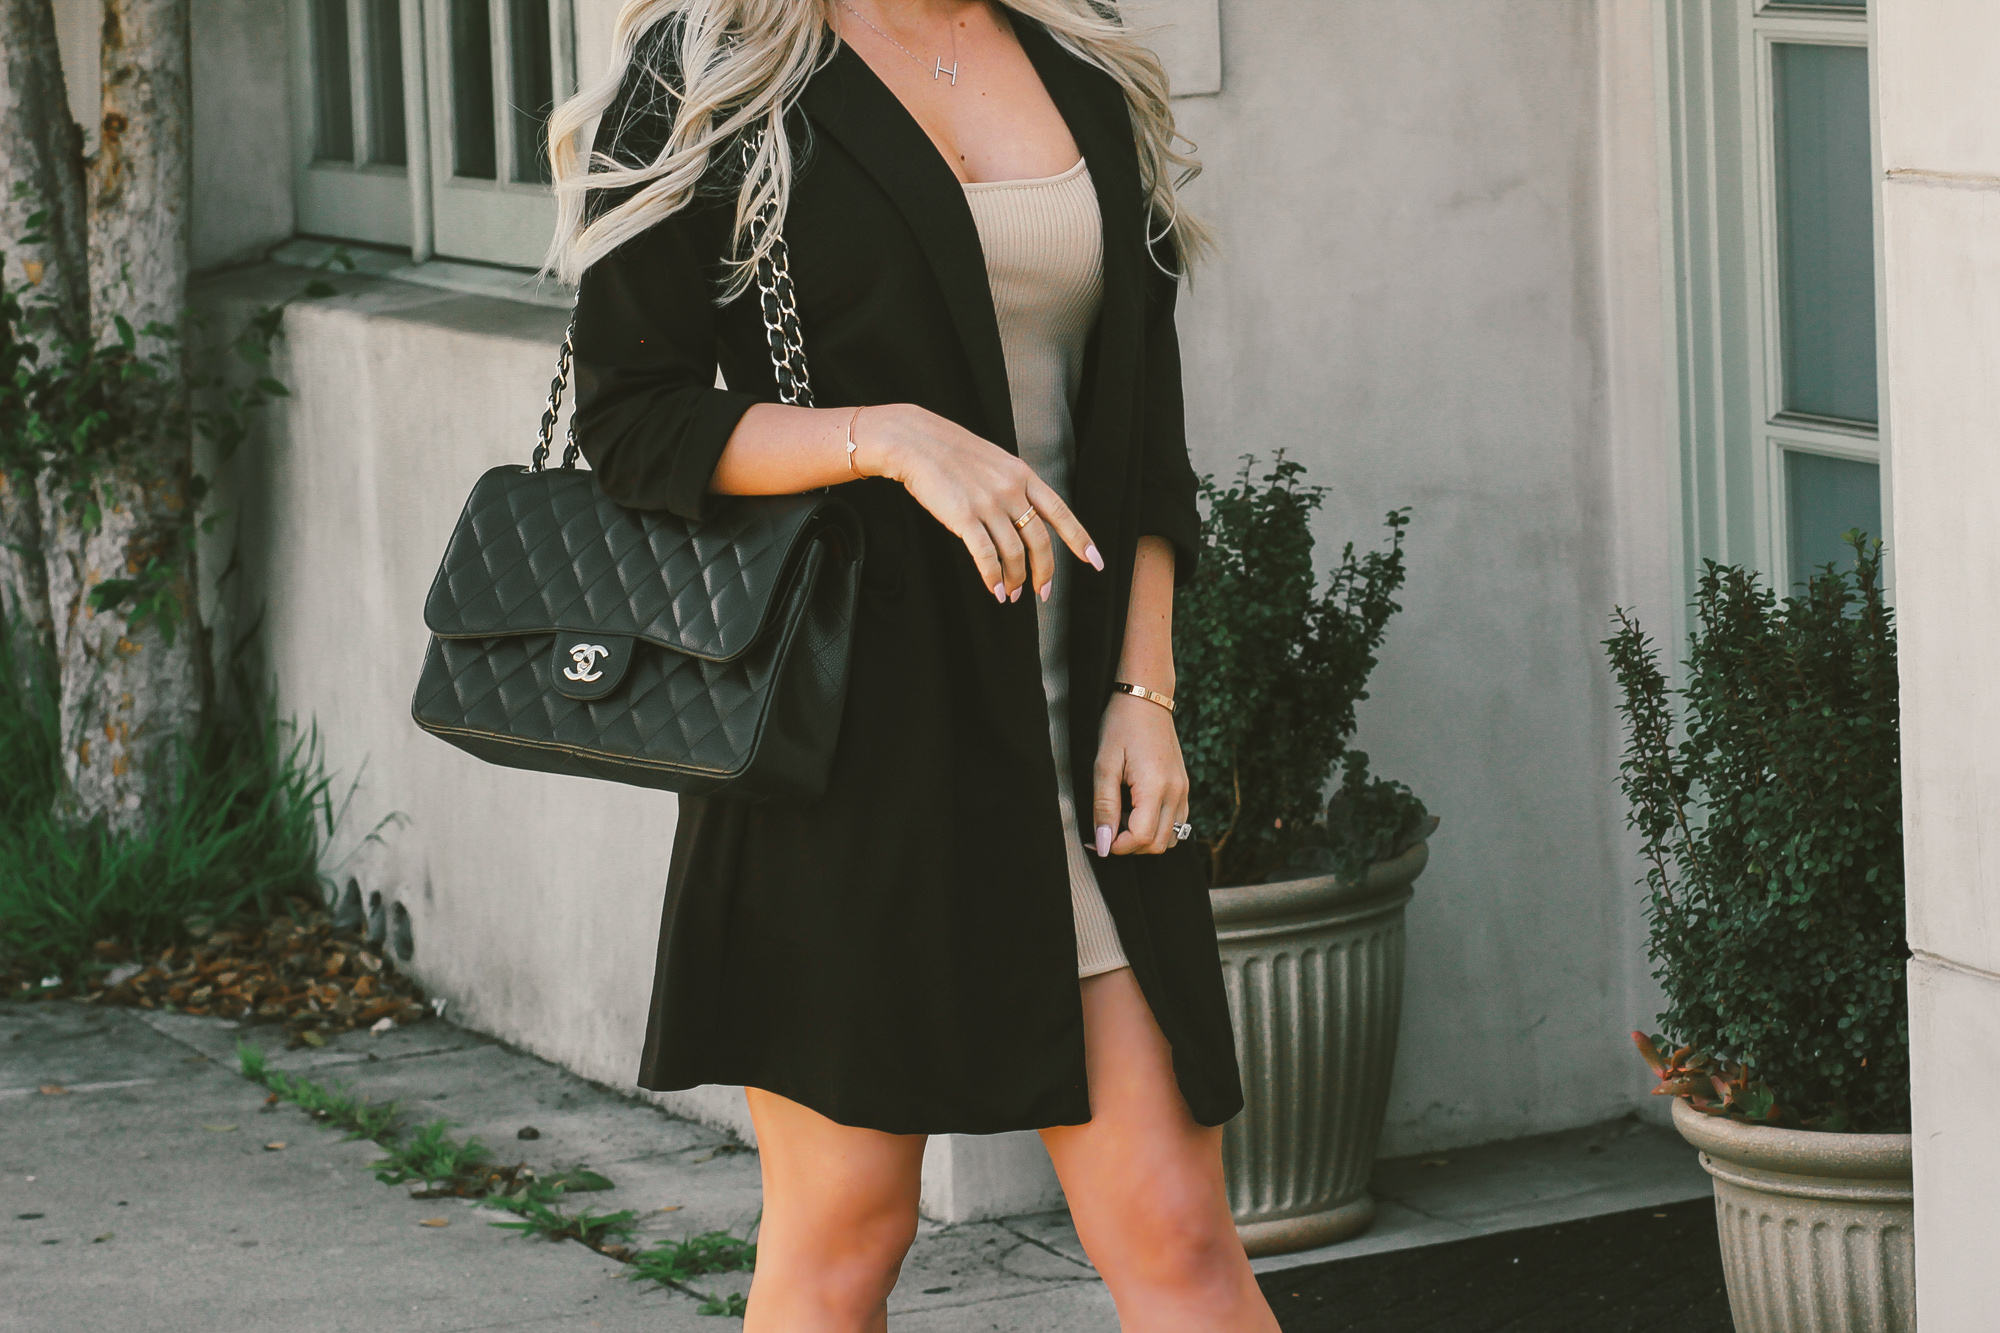 Classic Black Quilted Chanel Bag from @Tradesy | Use code HAYLEY50 for $50 off first purchase! | Nude Louboutins | Black Chanel | Quilted Chanel Caviar | Gucci Sunglasses | Blondie in the City by Hayley Larue